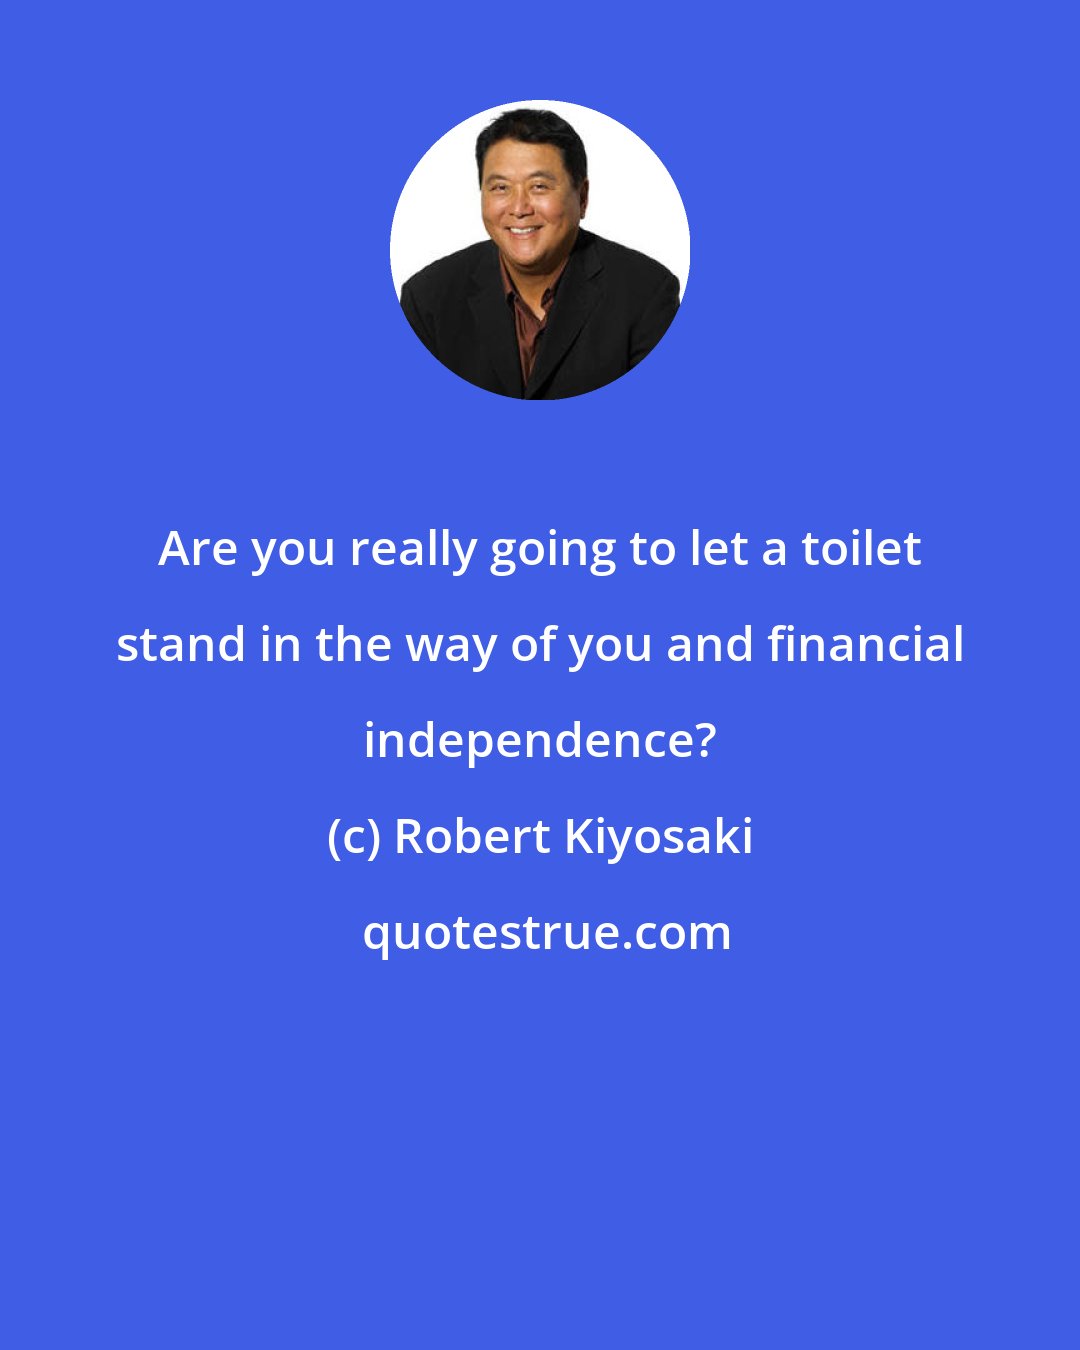 Robert Kiyosaki: Are you really going to let a toilet stand in the way of you and financial independence?